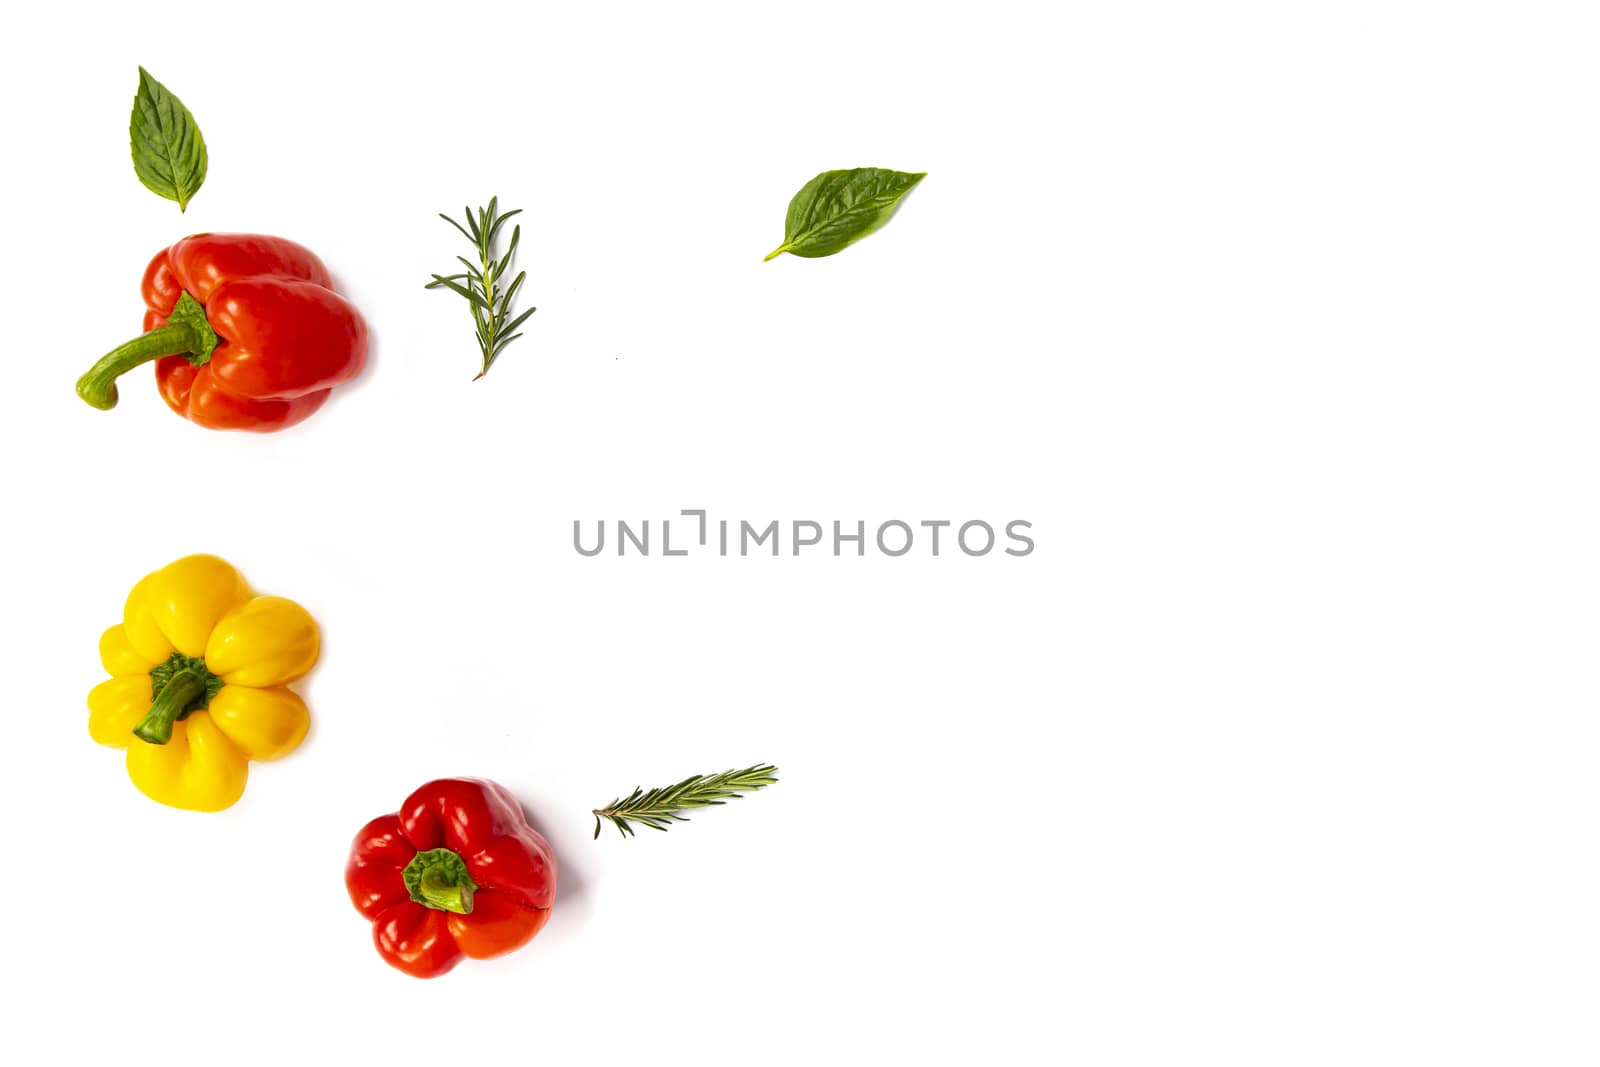 bell peppers with rosemary sprigs and basil leaves, top view by Nawoot